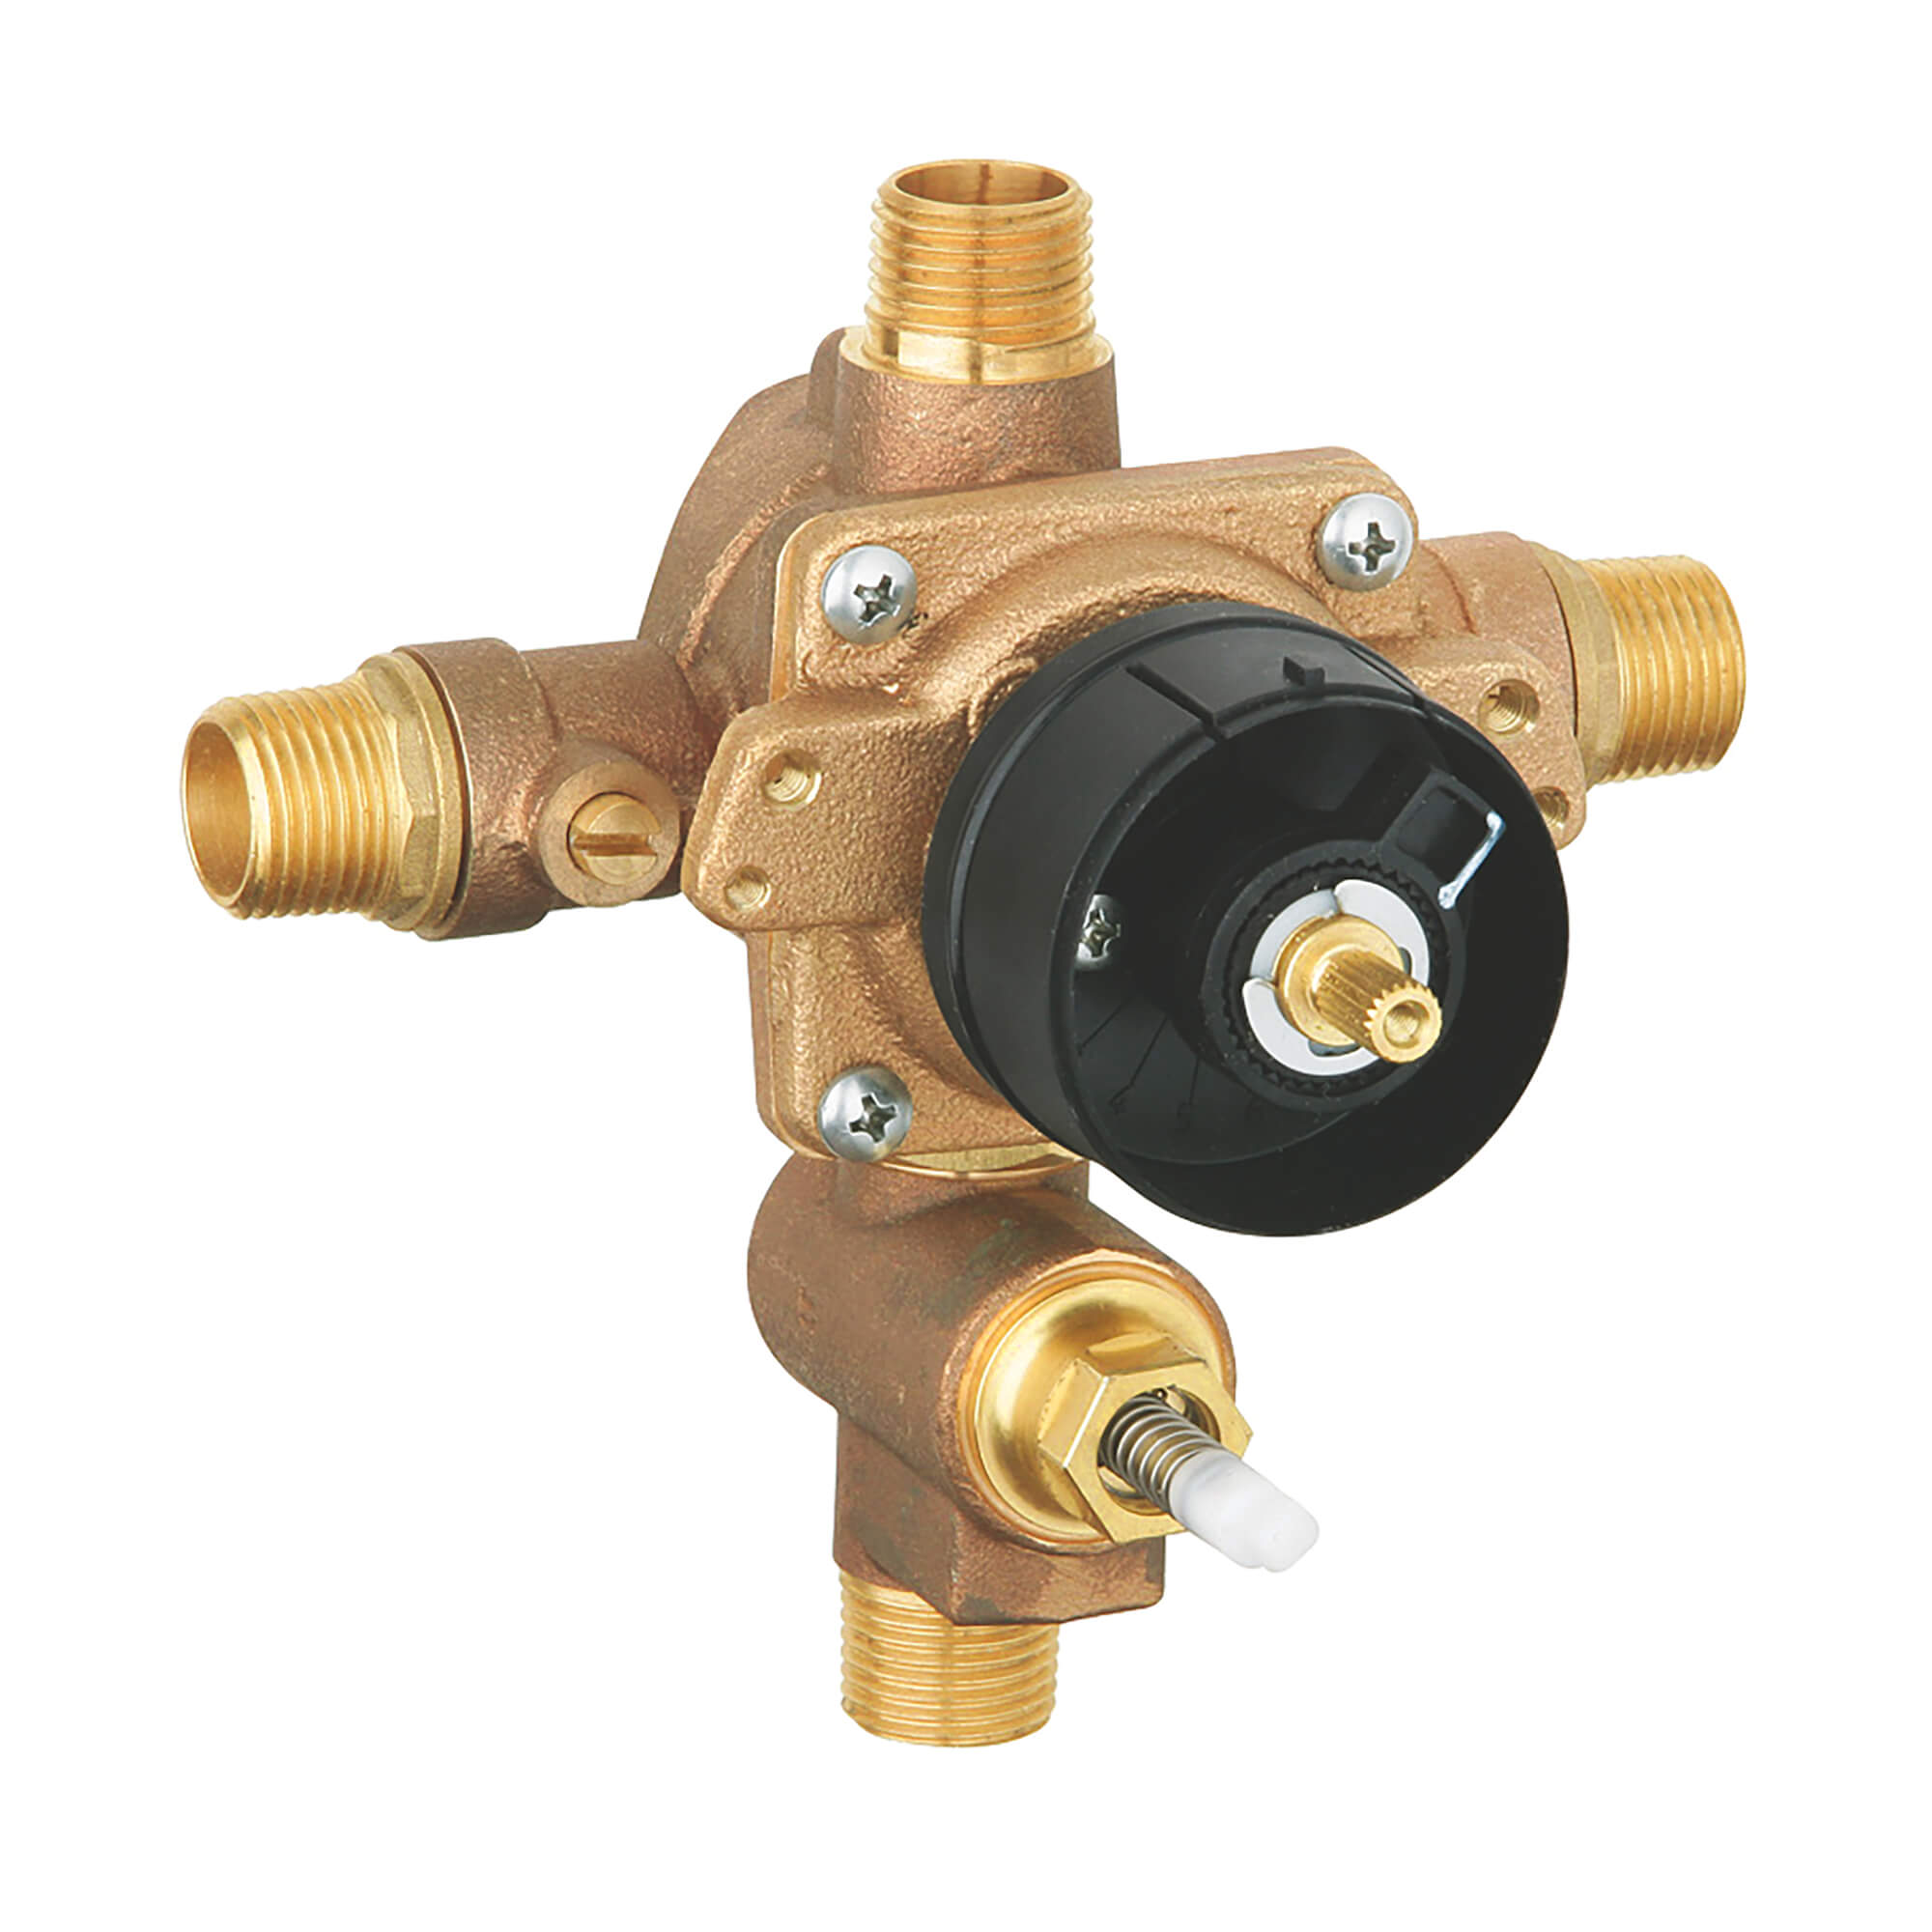 Details about   Pressure Equalization Shower Valve Professional 3/4in Double Outlet Brass Grass 